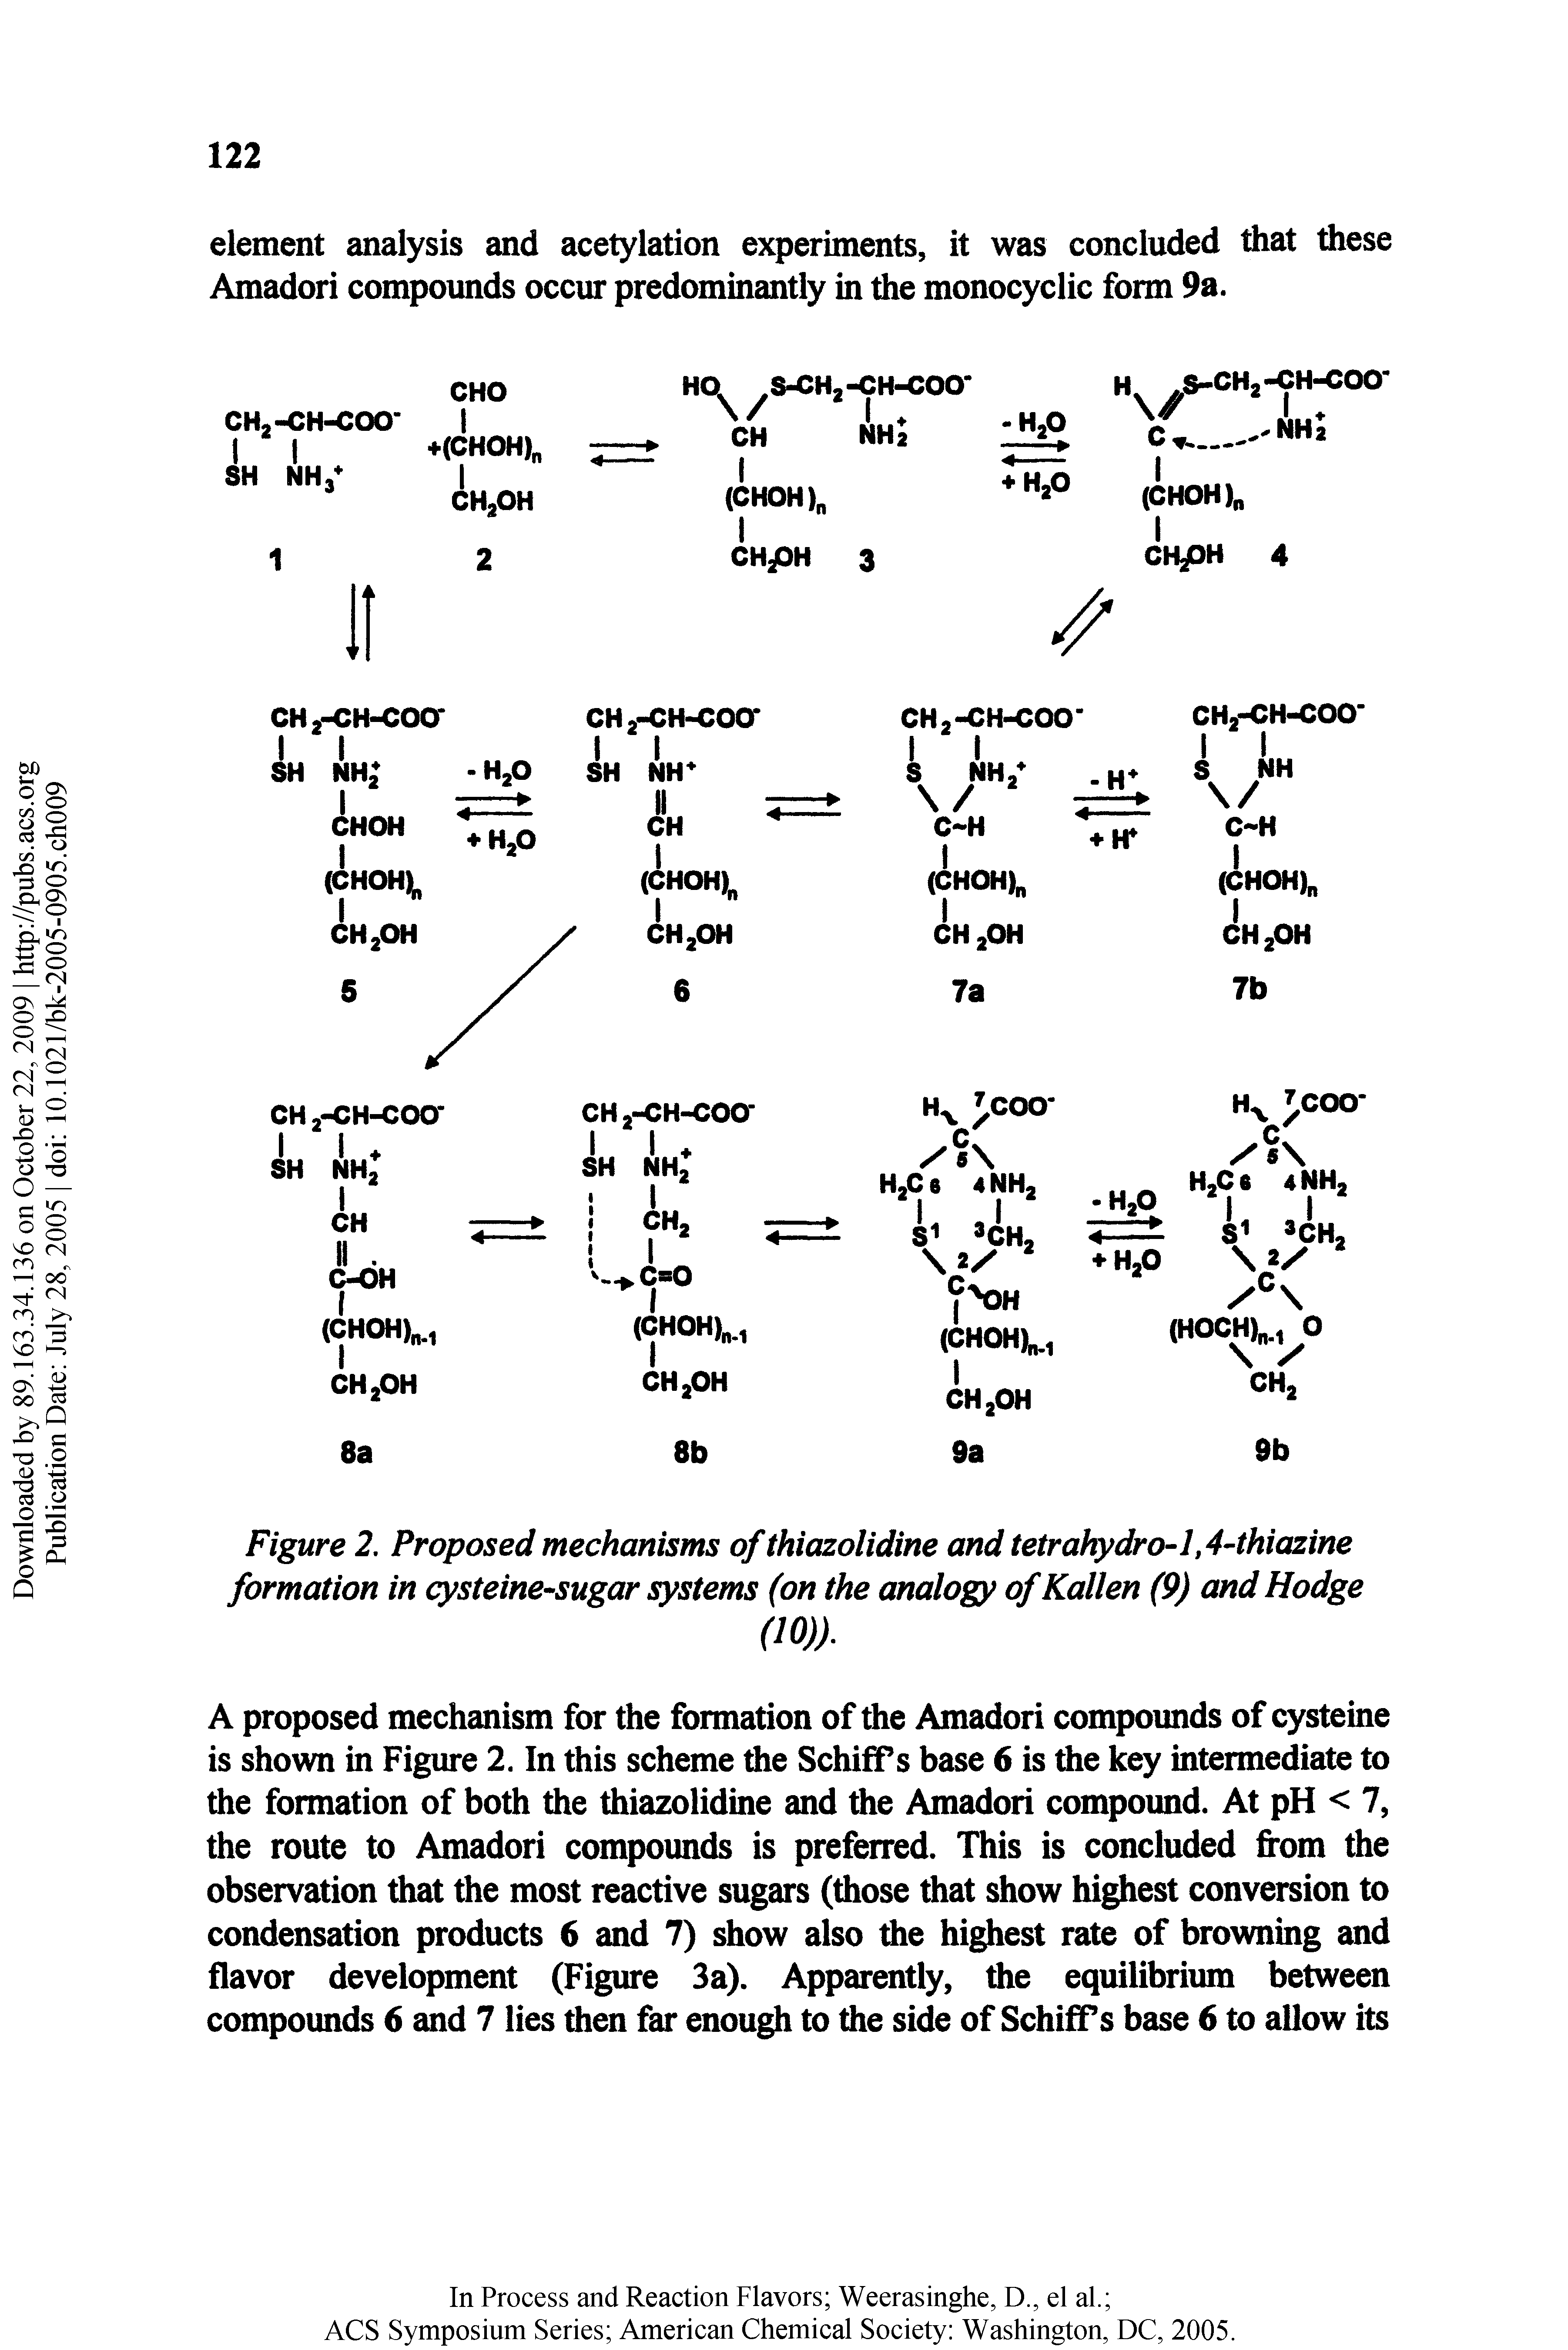 Figure 2. Proposed mechanisms of thiazolidine and tetrahydro-1,4-thicaine formation in cysteine-sugar systems (on the analogy of Kallen (9) and Hodge...